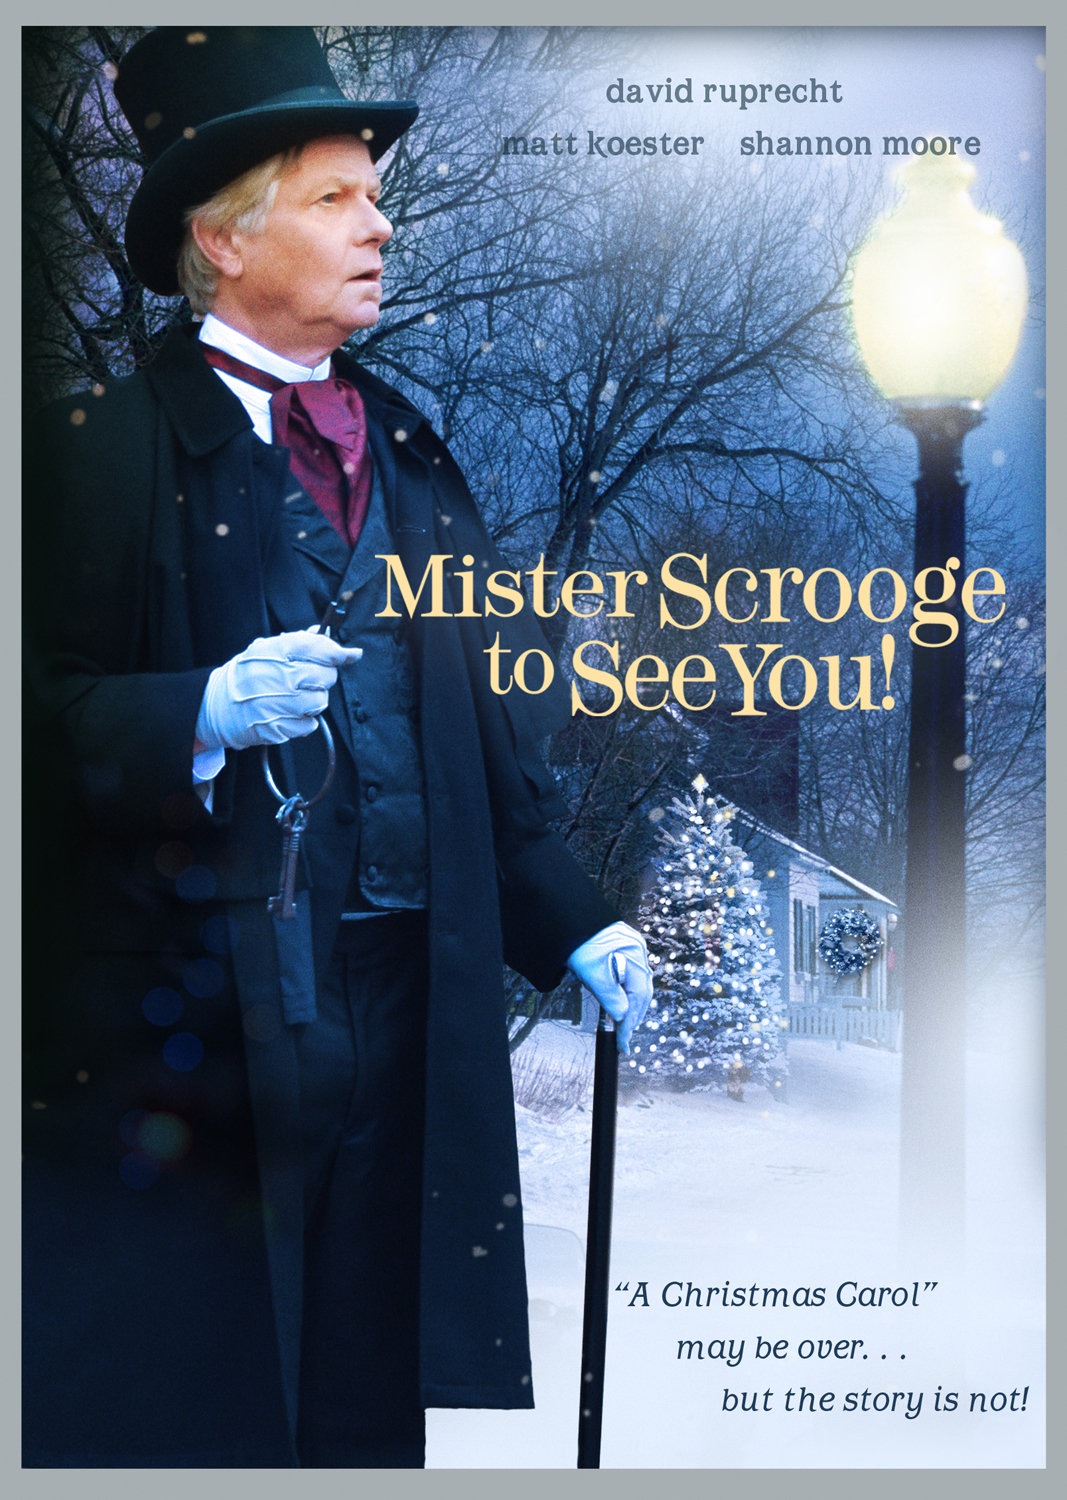 Mister Scrooge to See You (2013) Screenshot 1 